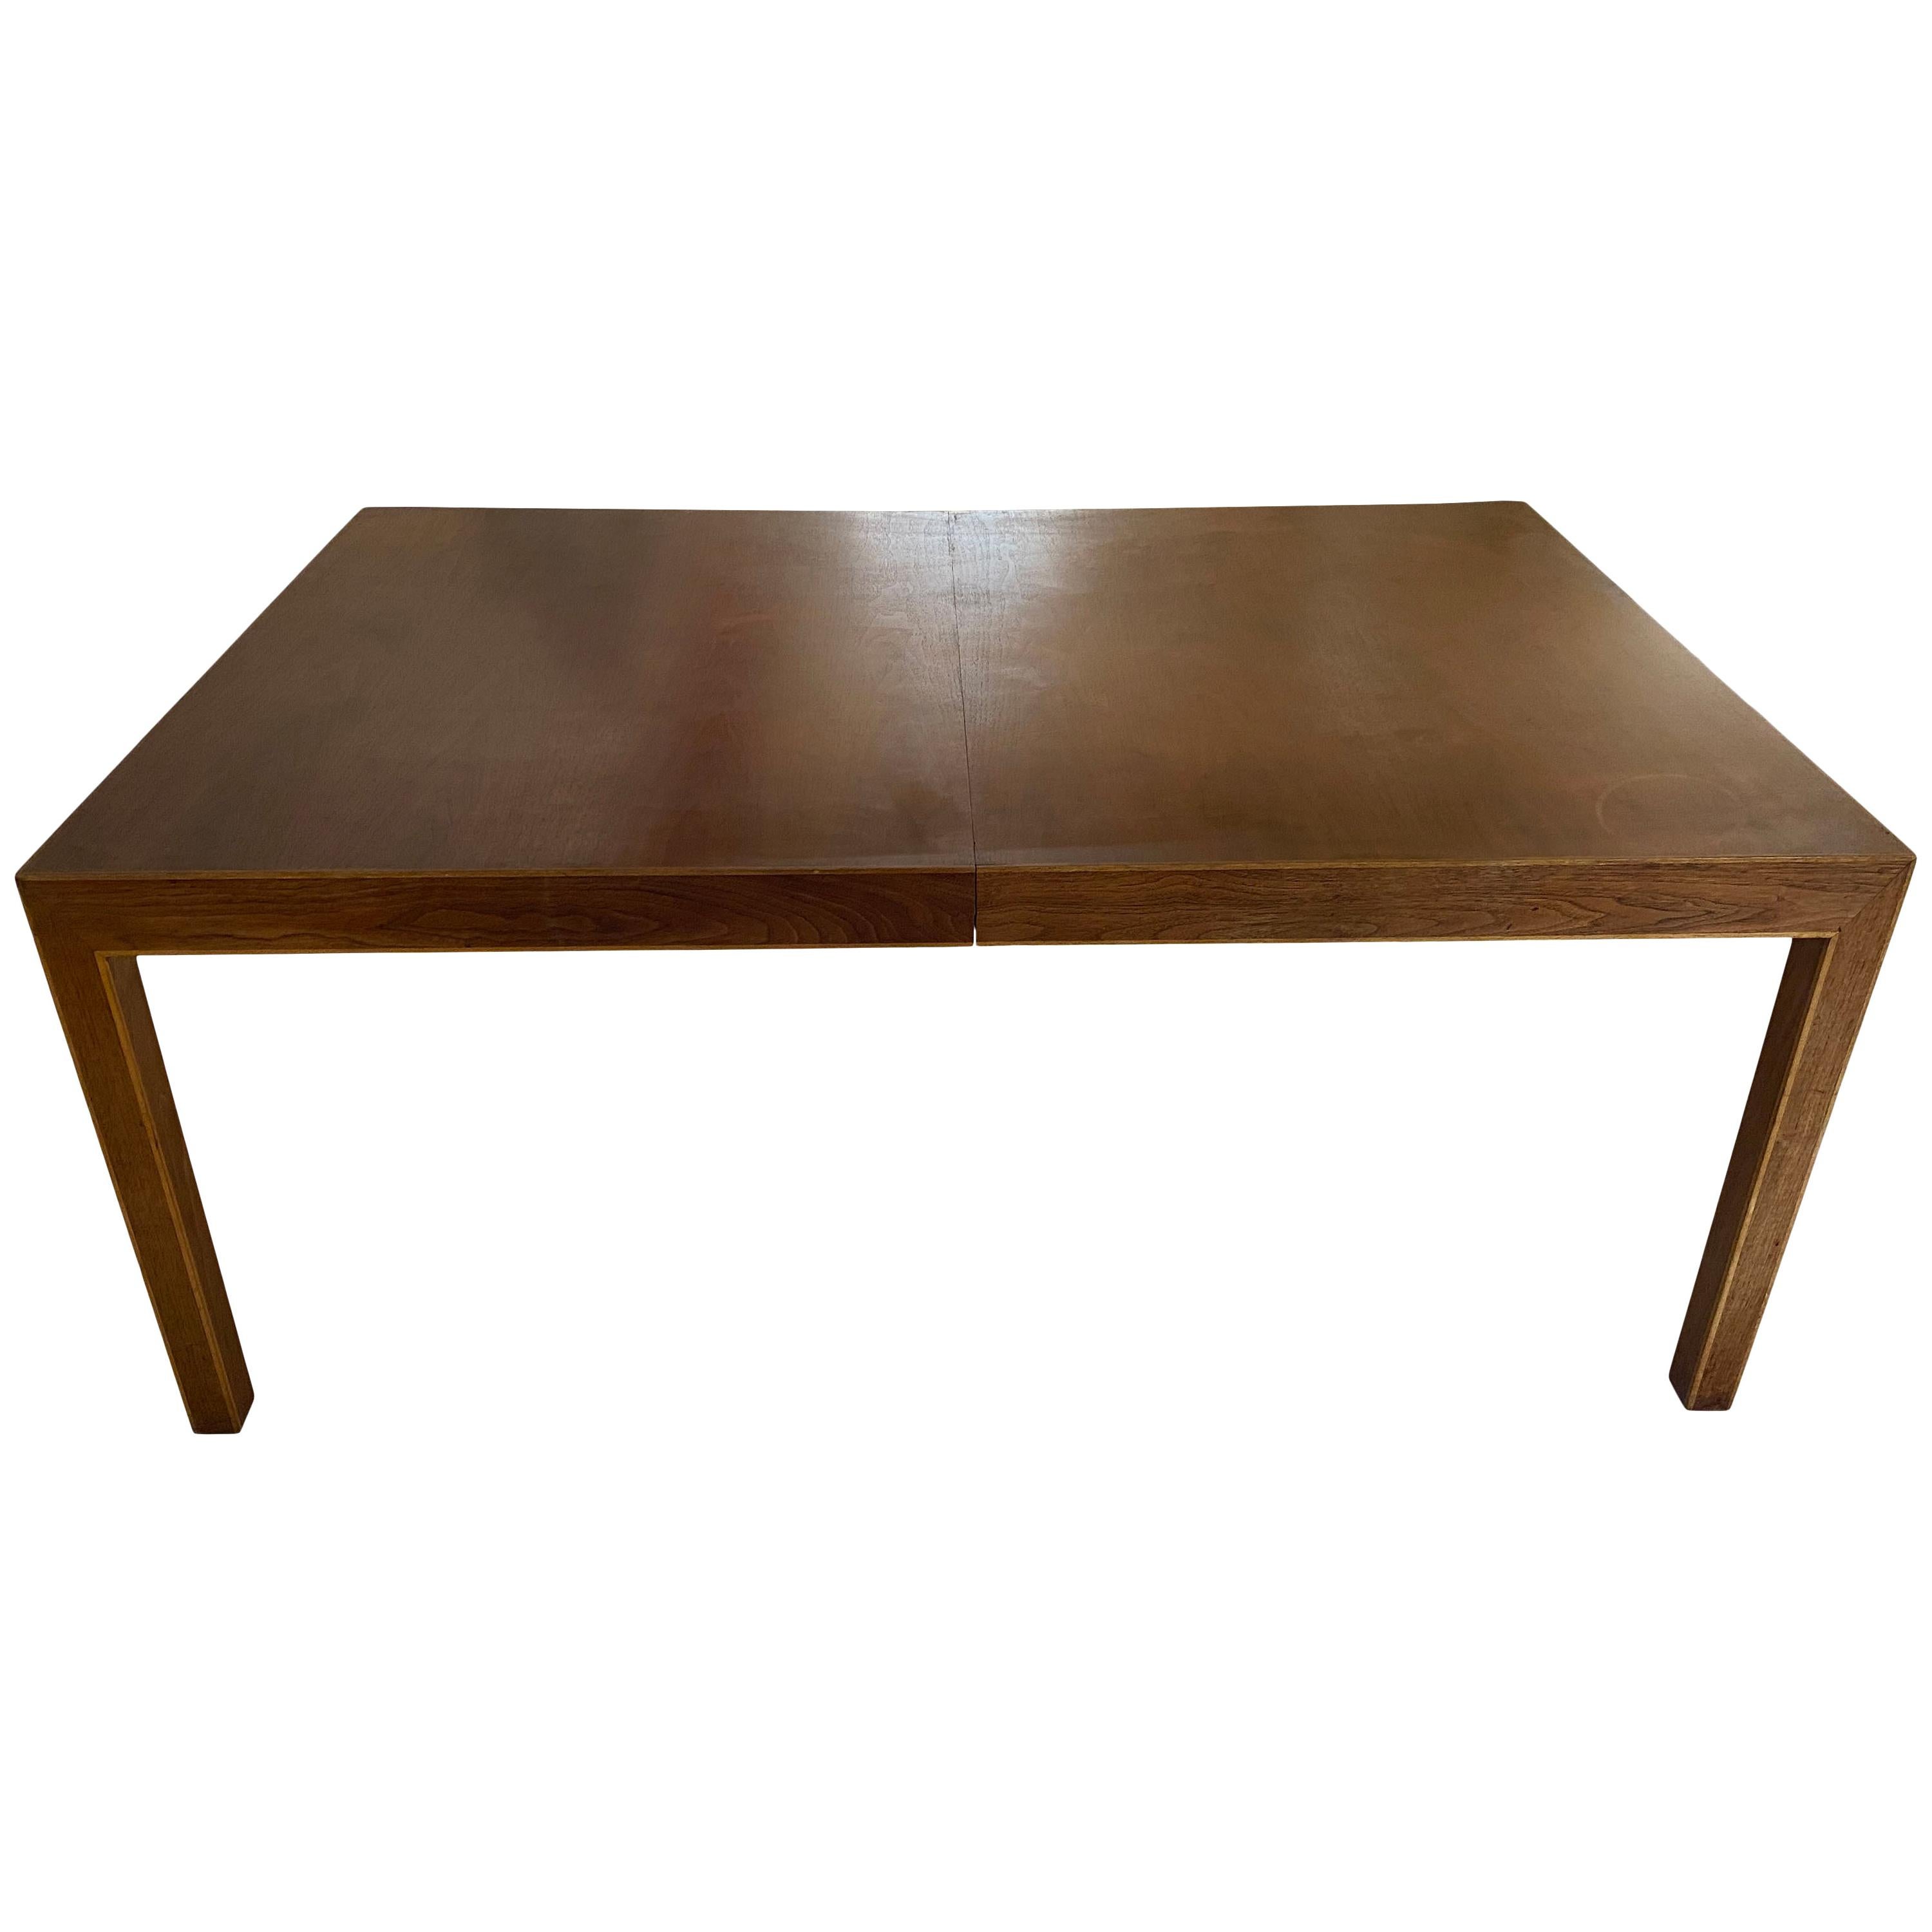 Midcentury Milo Baughman Walnut Expandable Parsons Dining Table with '2' Leaves